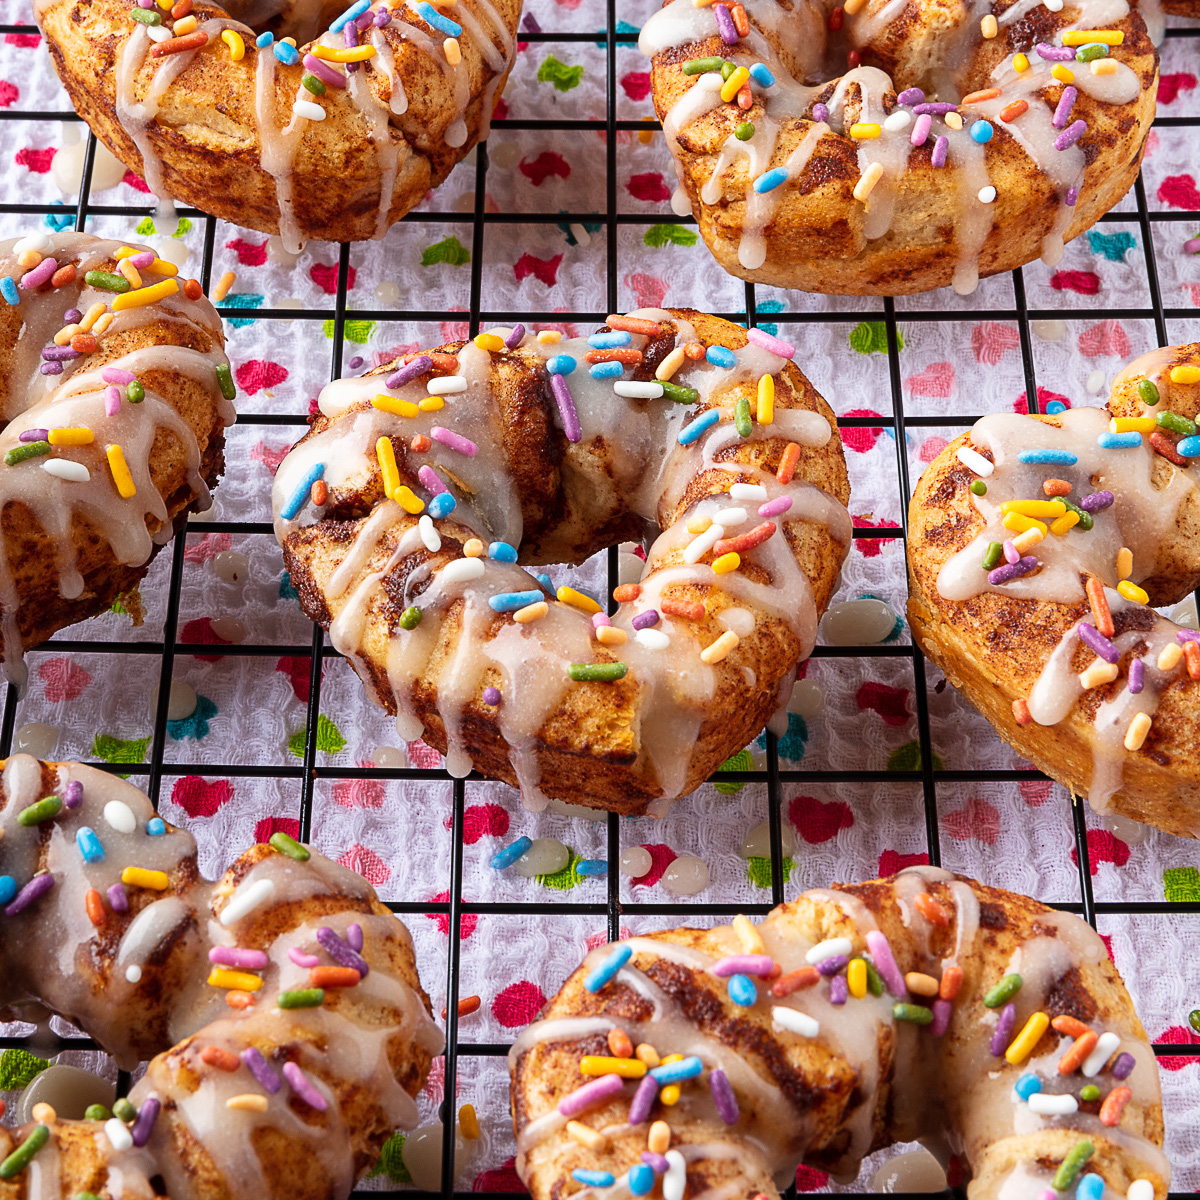 vegan cinnamon roll donuts topped with icing and Color Kitchen rainbow sprinkles